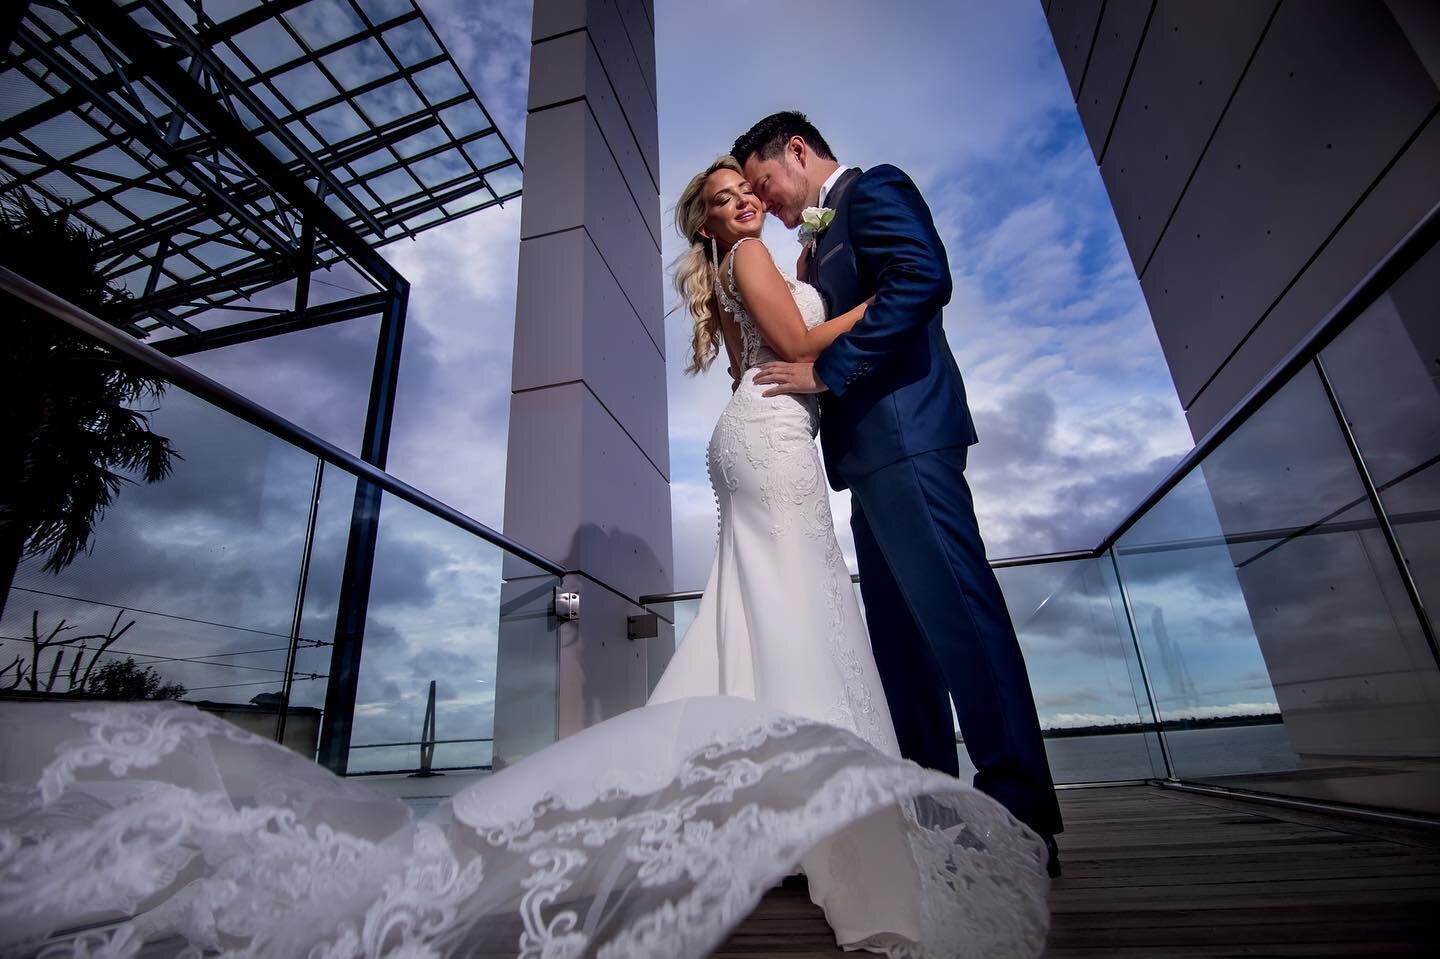 Are Holly and Glenn not incredibly stunning?! They had the most beautiful Charleston wedding at @southcarolinaaquarium a couple weeks ago. The weather was not on our side all morning but God answered prayers and the clouds cleared just enough for the